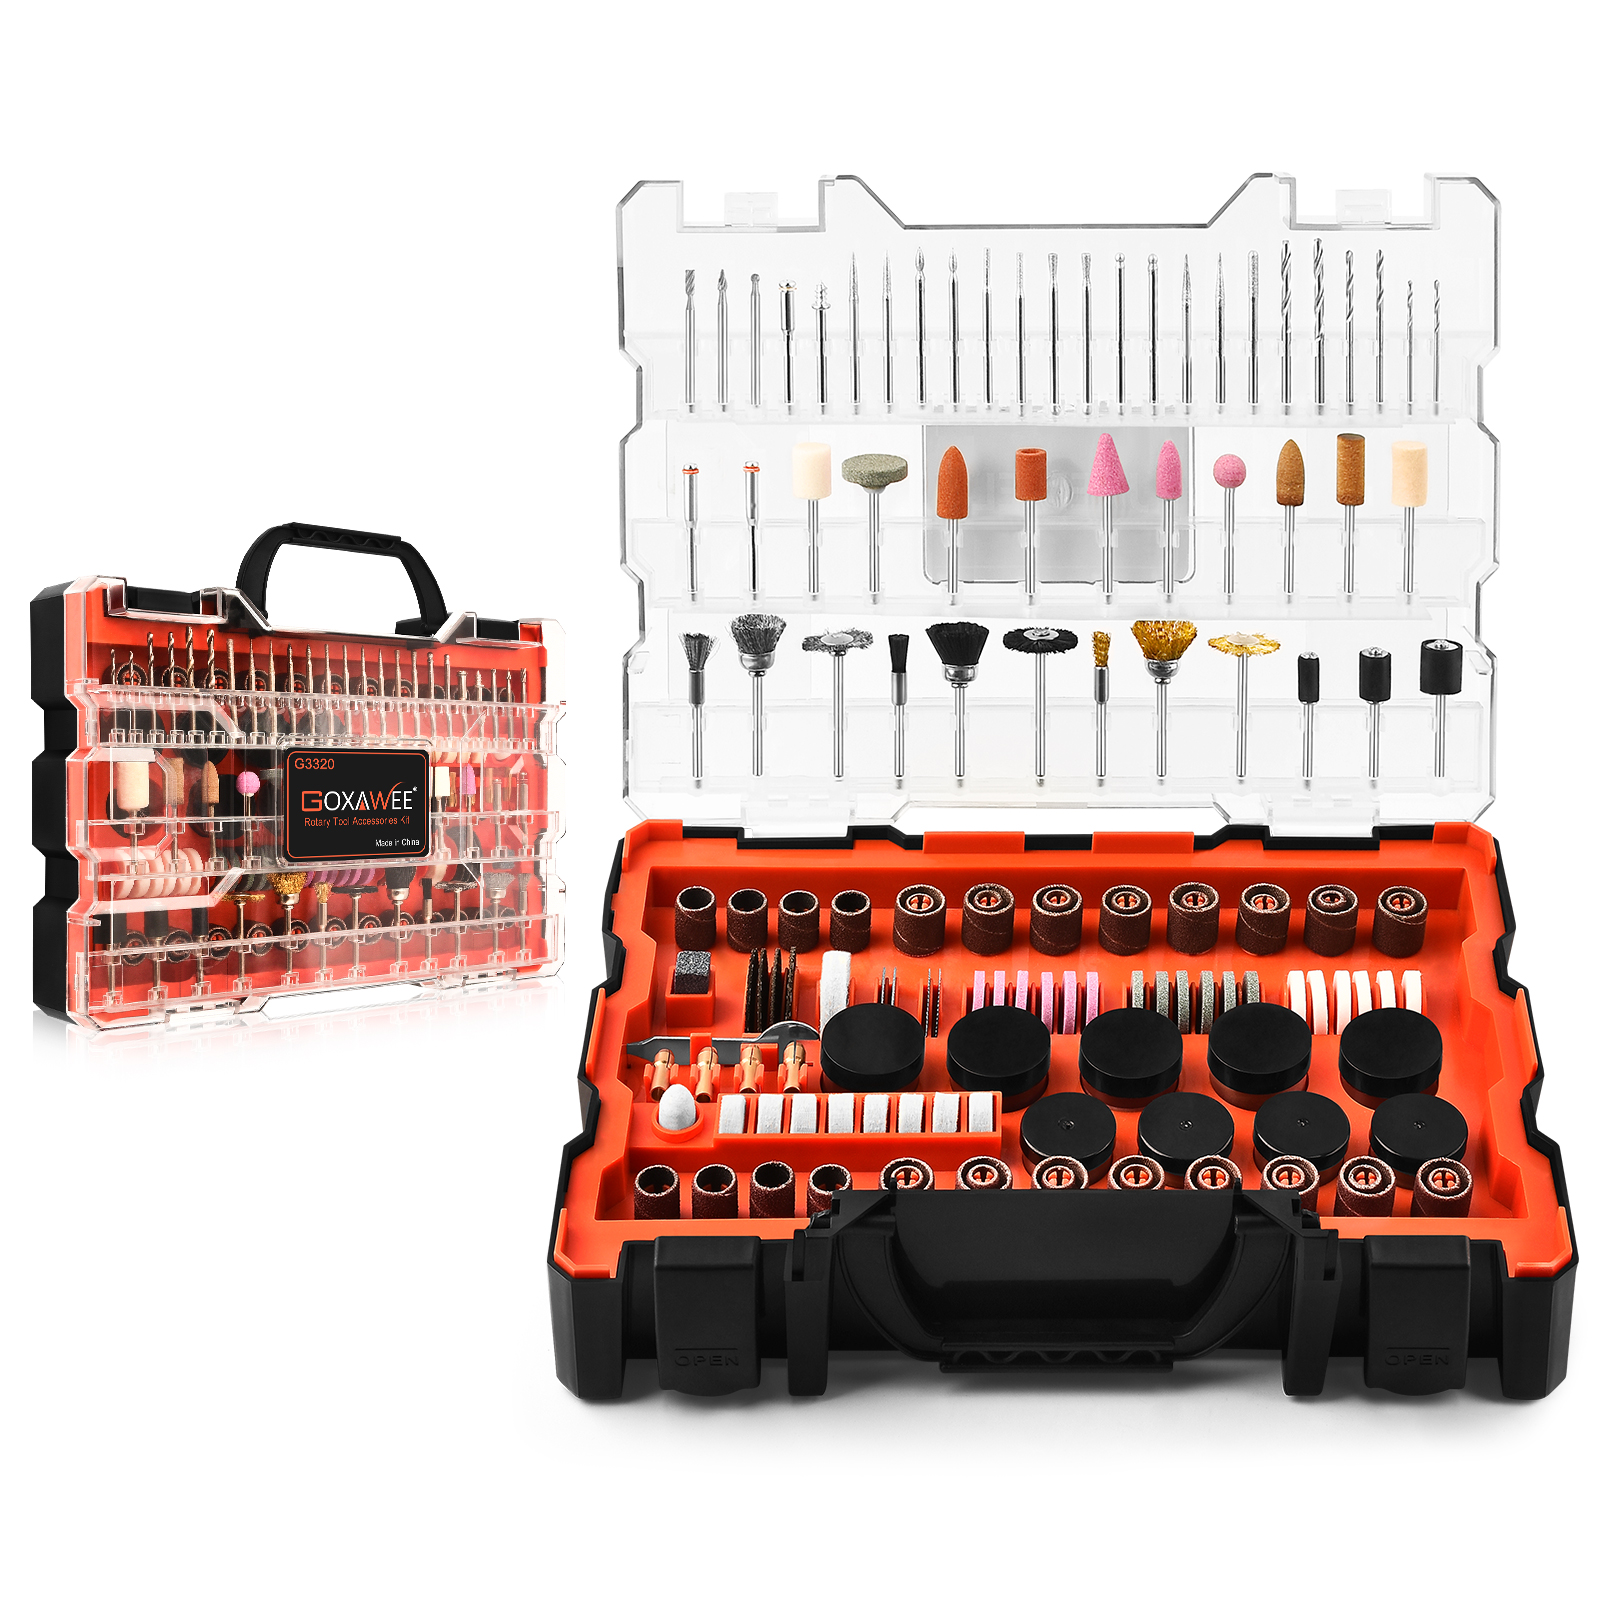 480Pcs Rotary Tool Accessories Kit, GOXAWEE 1/8-inch Shan, GOXAWEE 1/8-inch Shank Rotary Tool Accessory Set, Multi Purpose Universal Kit for Cutting, Drilling, Grinding, Polishing, Engraving & Sanding